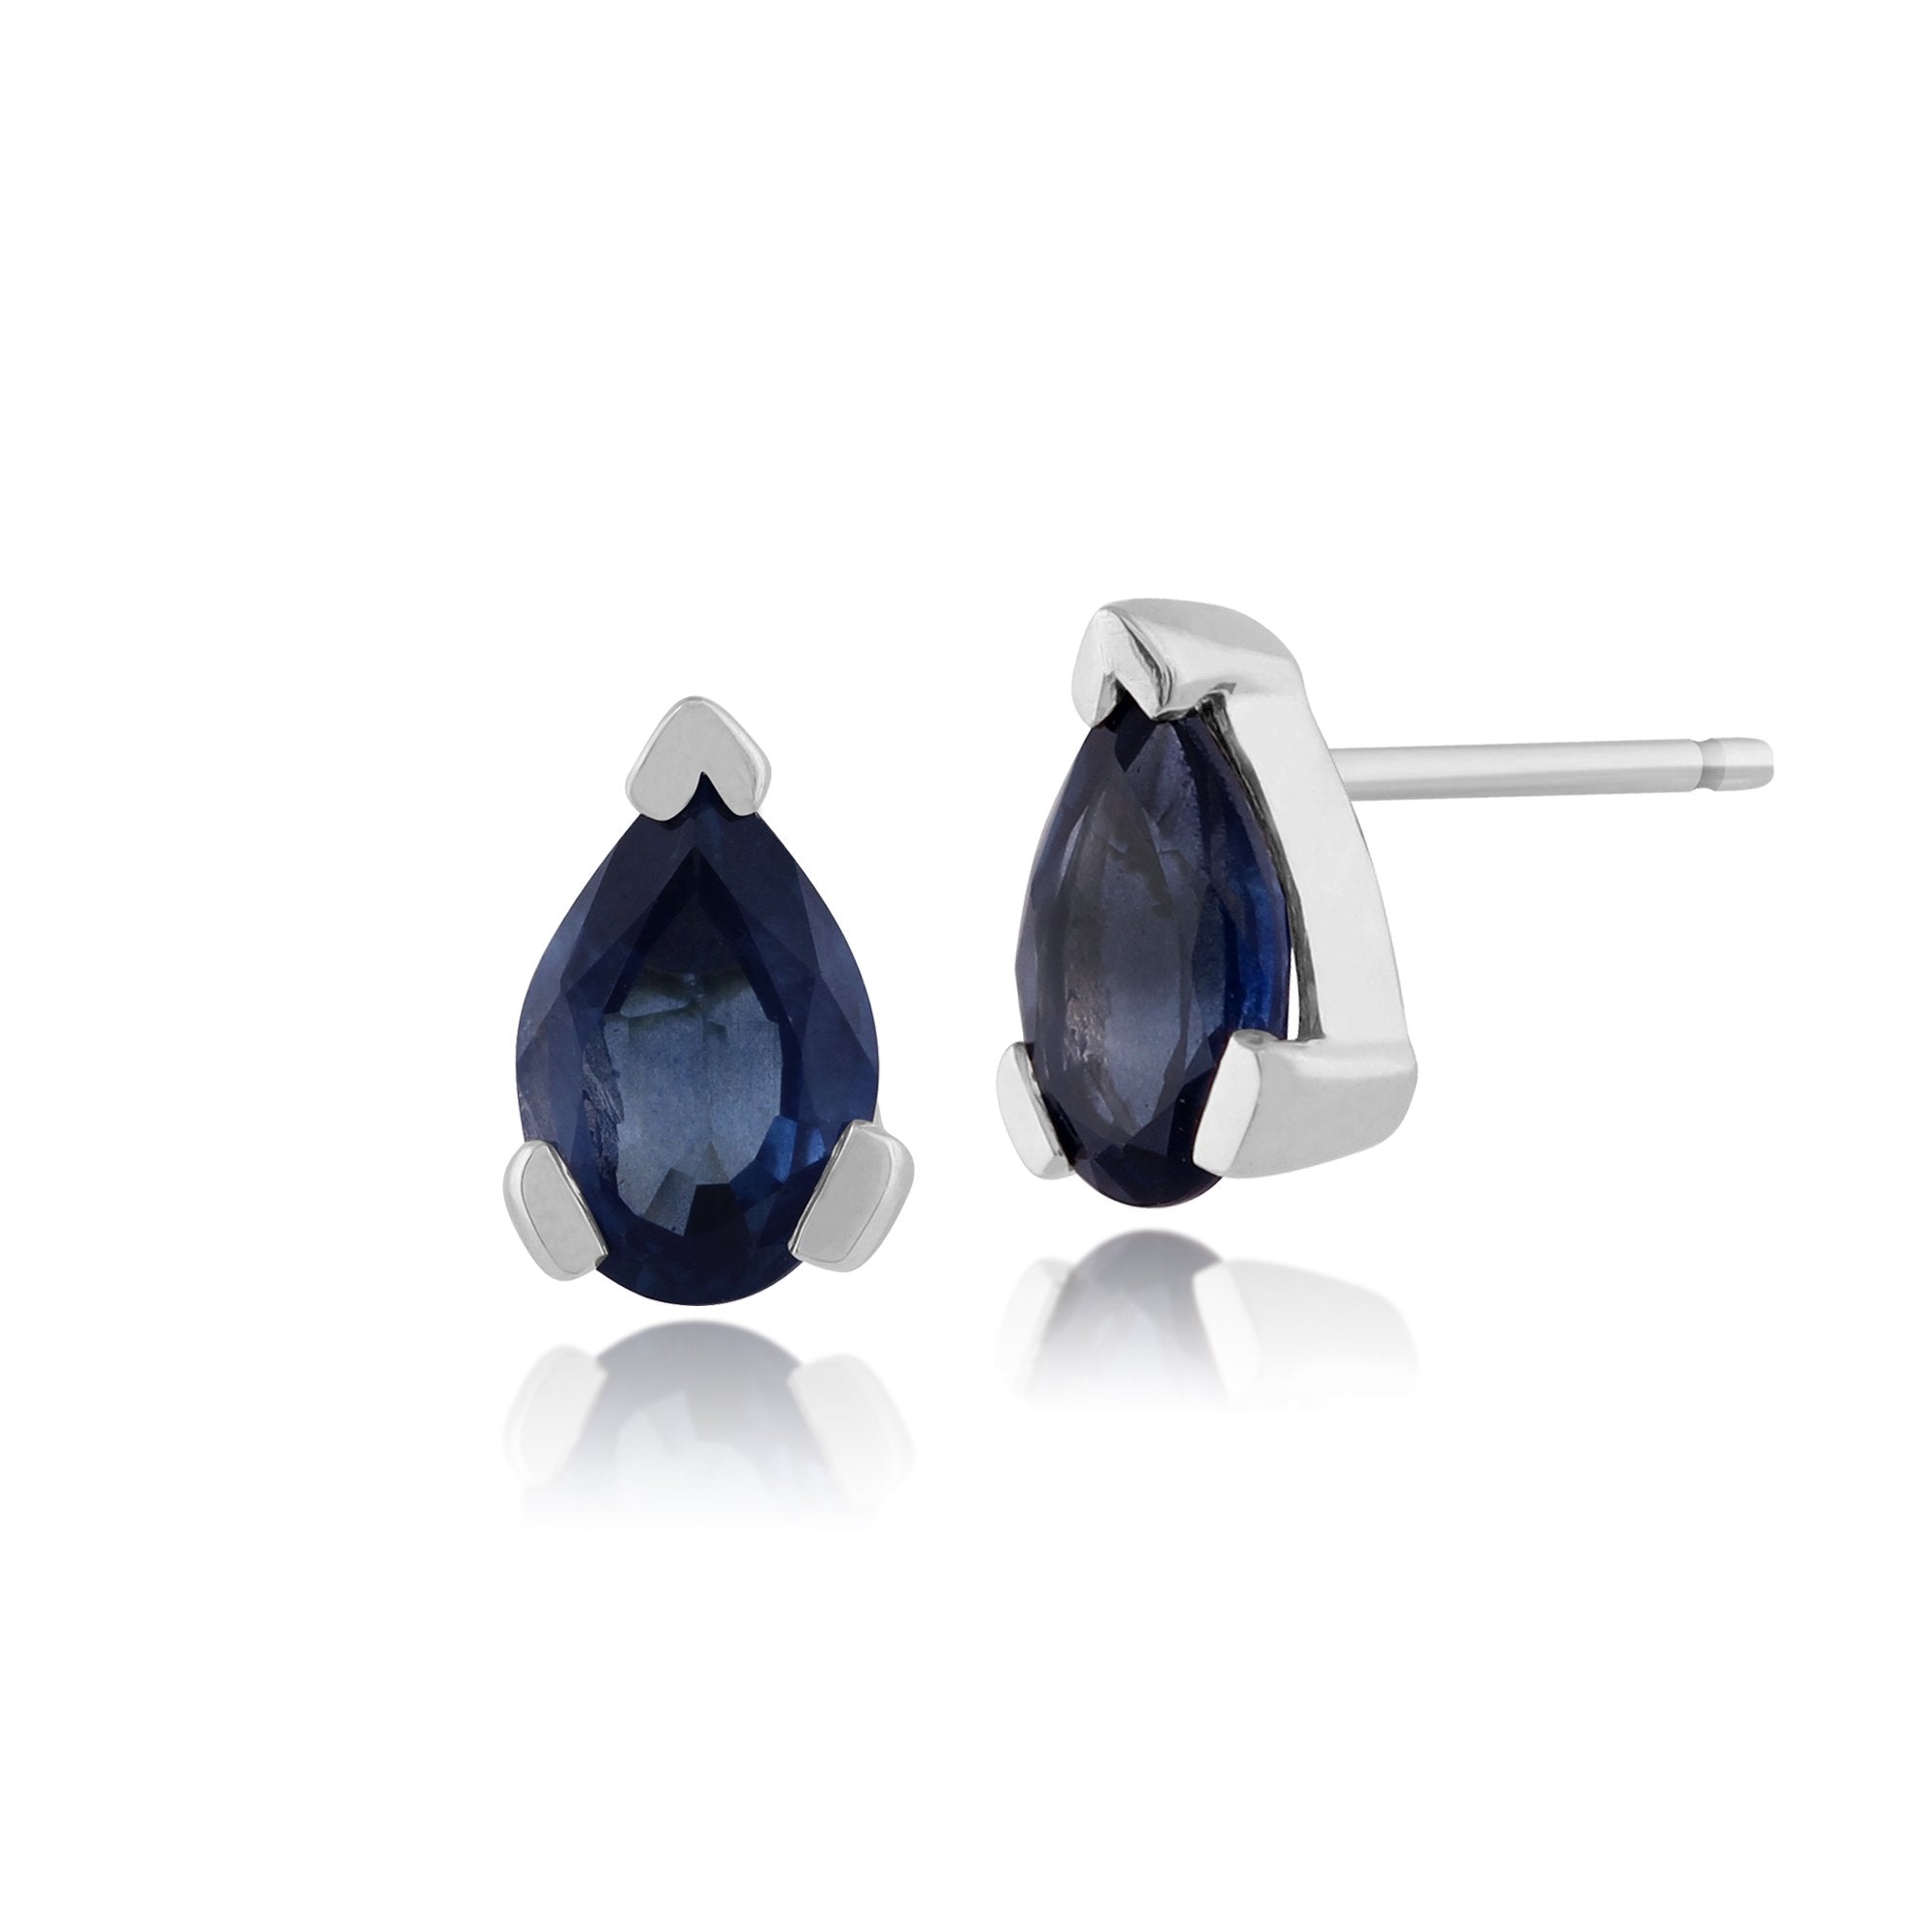 Classic Pear Light Blue Sapphire Stud Earrings in 9ct White Gold 6.5x4mm